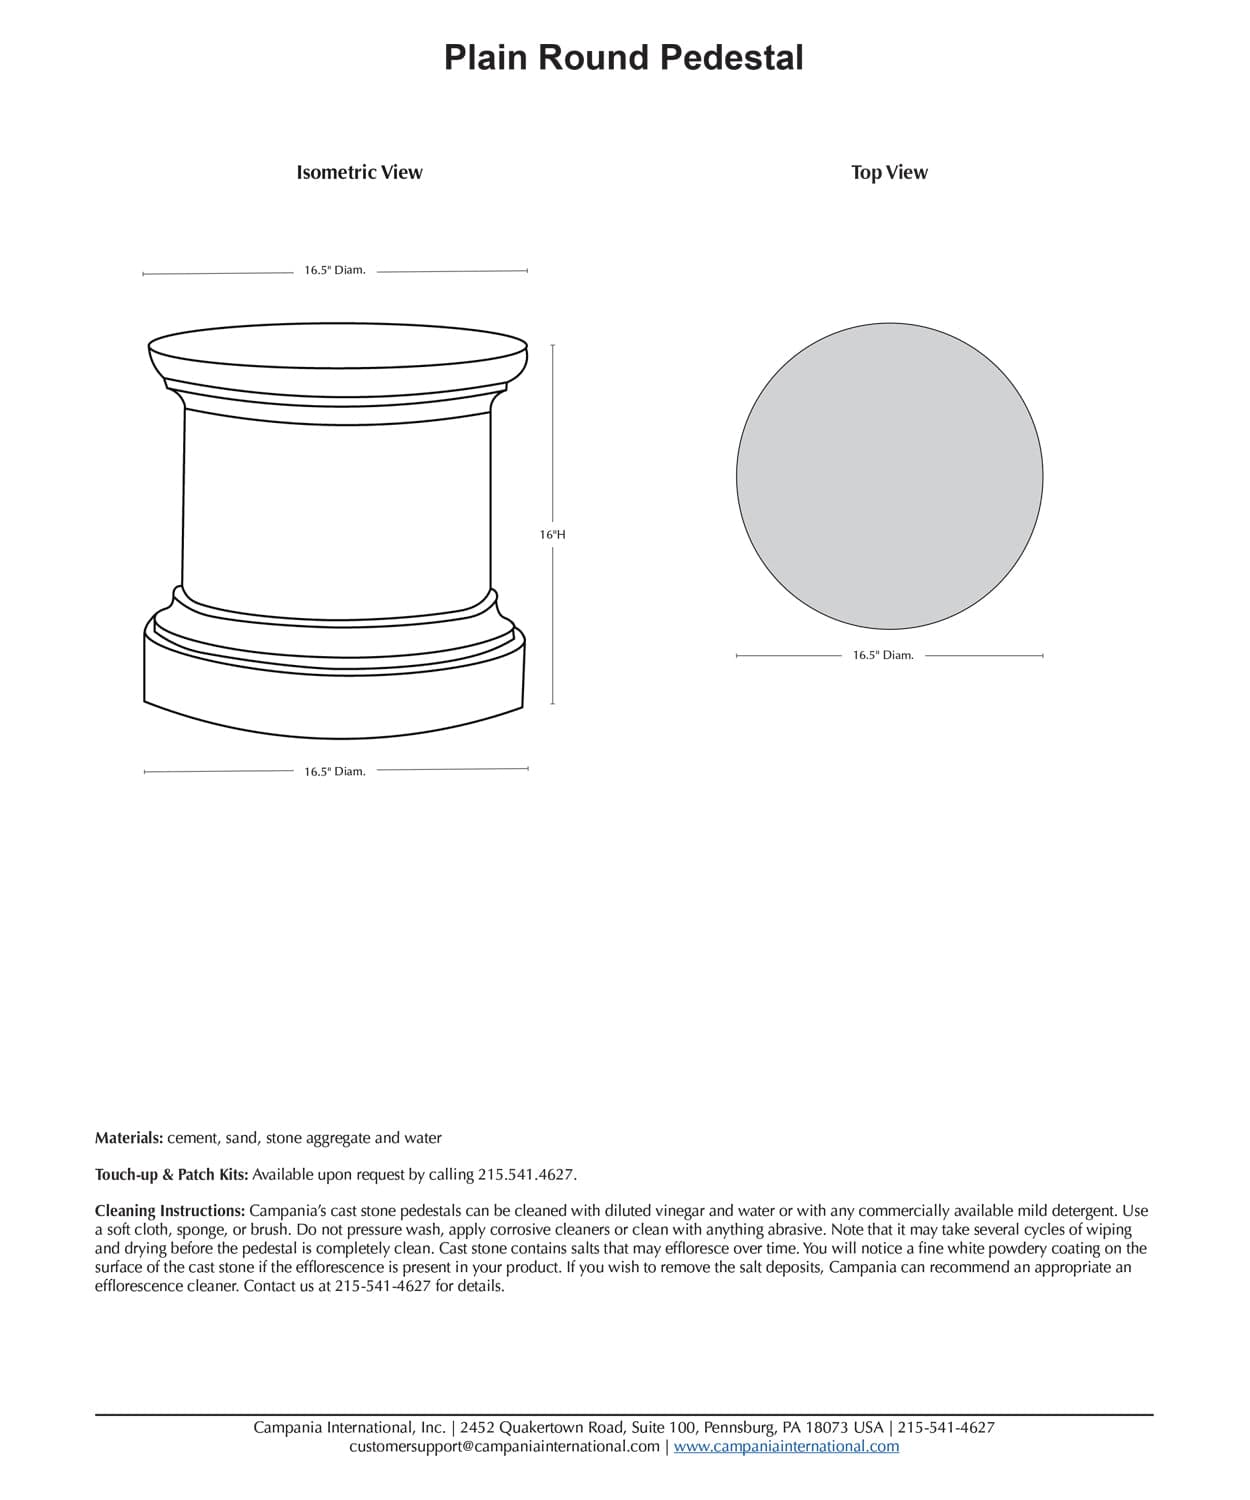 Plain Round Pedestal for Urn and Statues